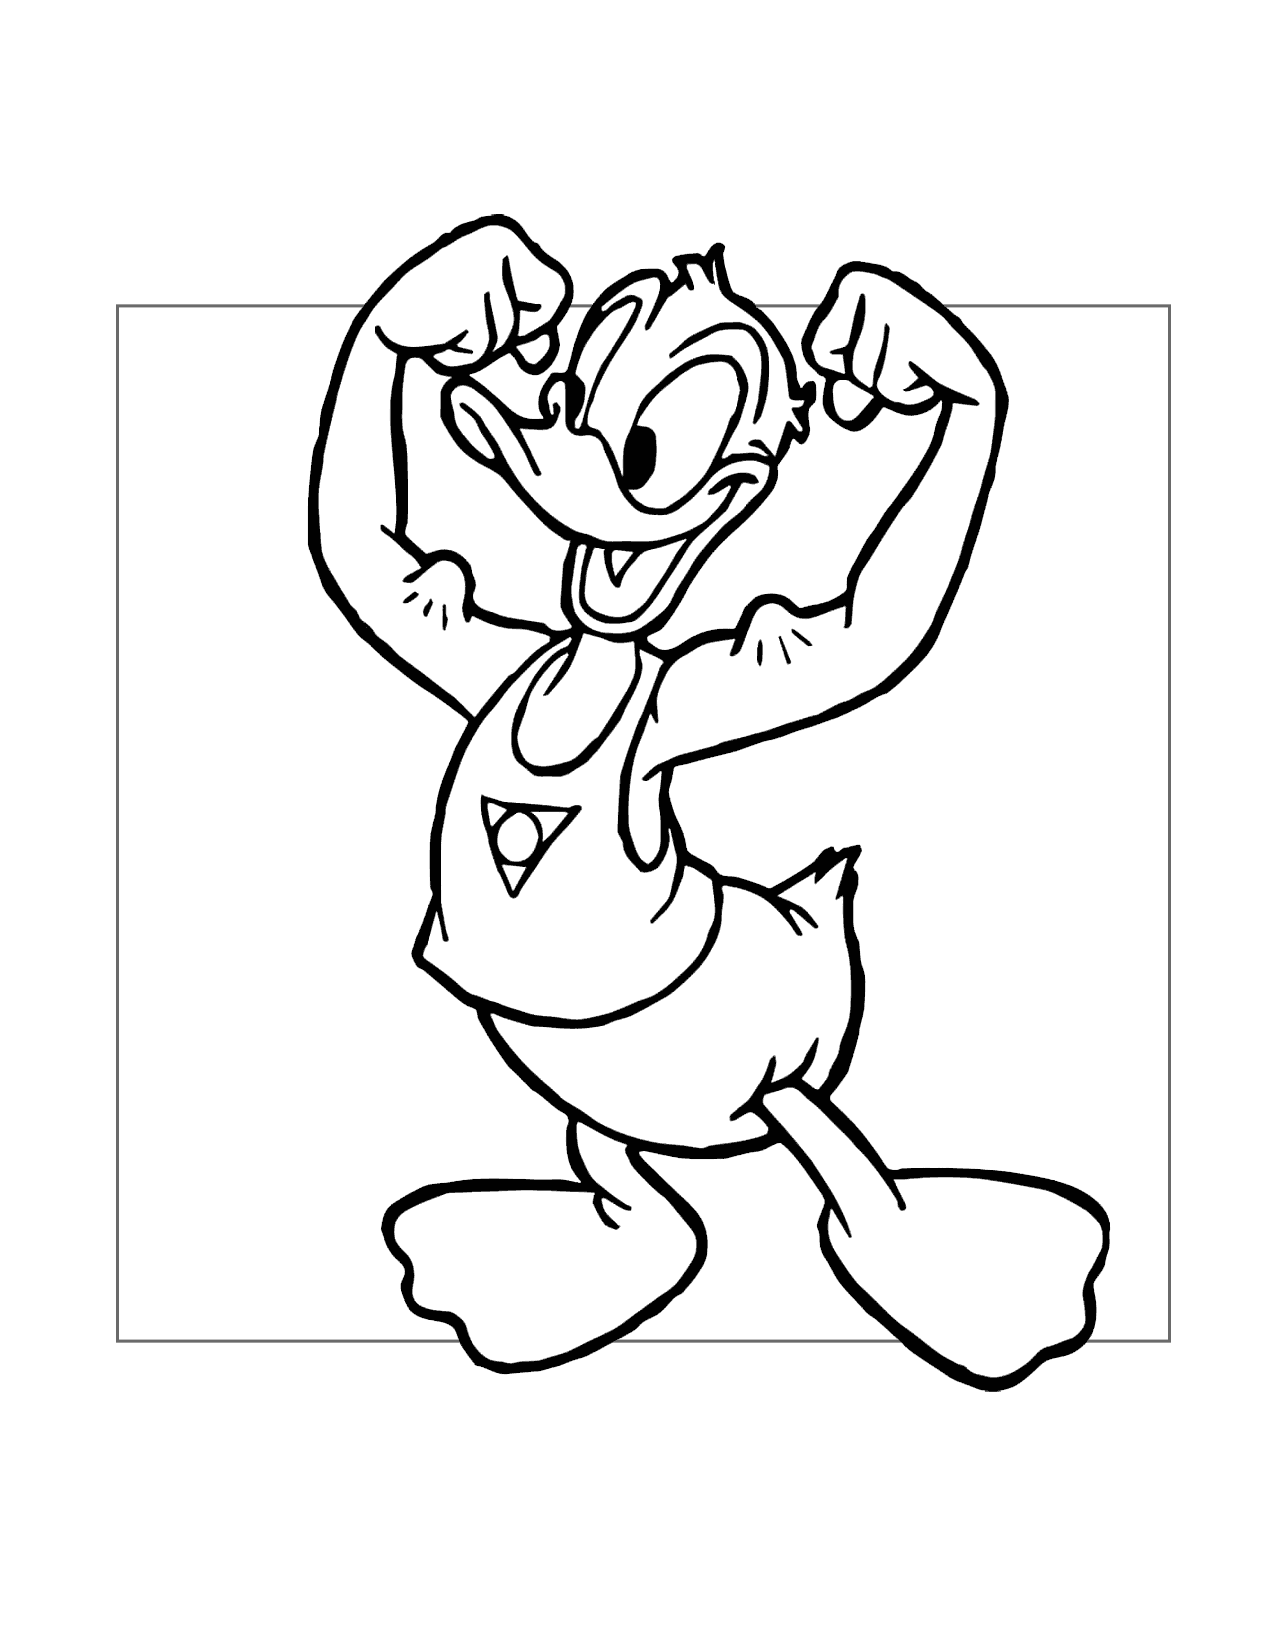 Donald Duck Bodybuilder Coloring Page